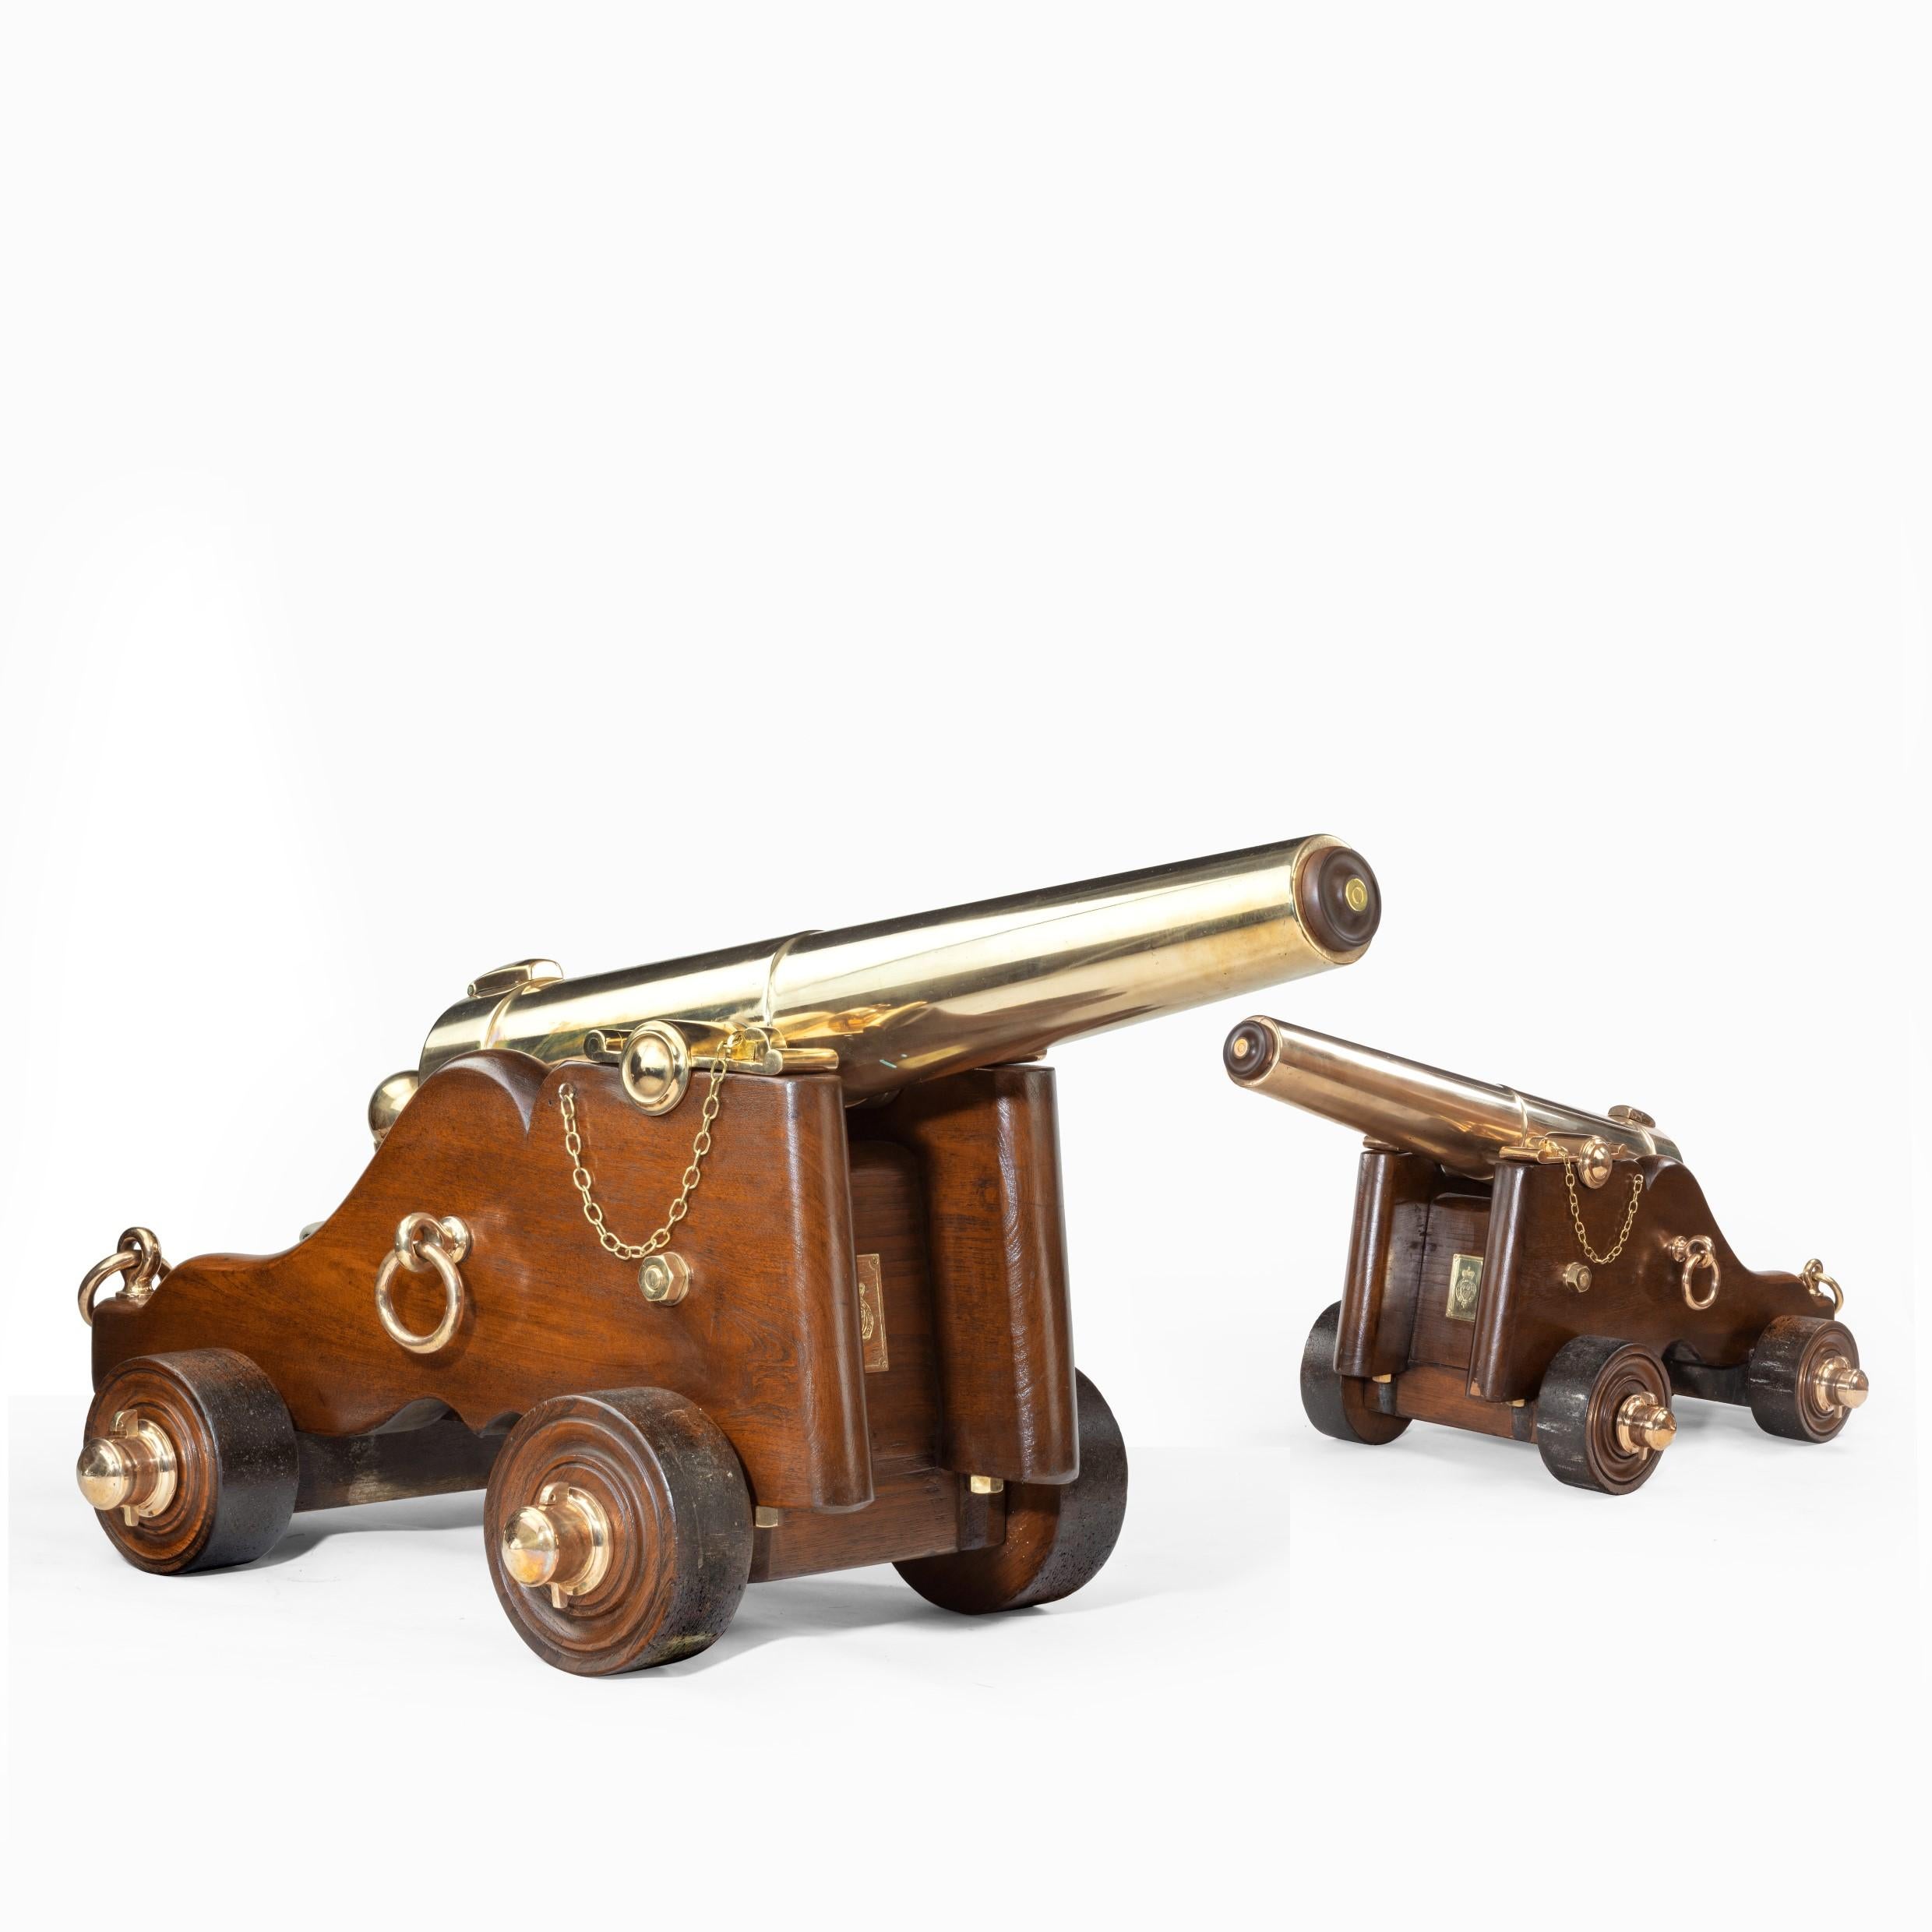 This pair of early Victorian three-stage bronze signal cannon are set on elm carriages with bronze fittings.

Each 39 inch tapering barrel has one reduction and a ball cascabel. The trunnions have chain and pin locks and cast bronze trajectory